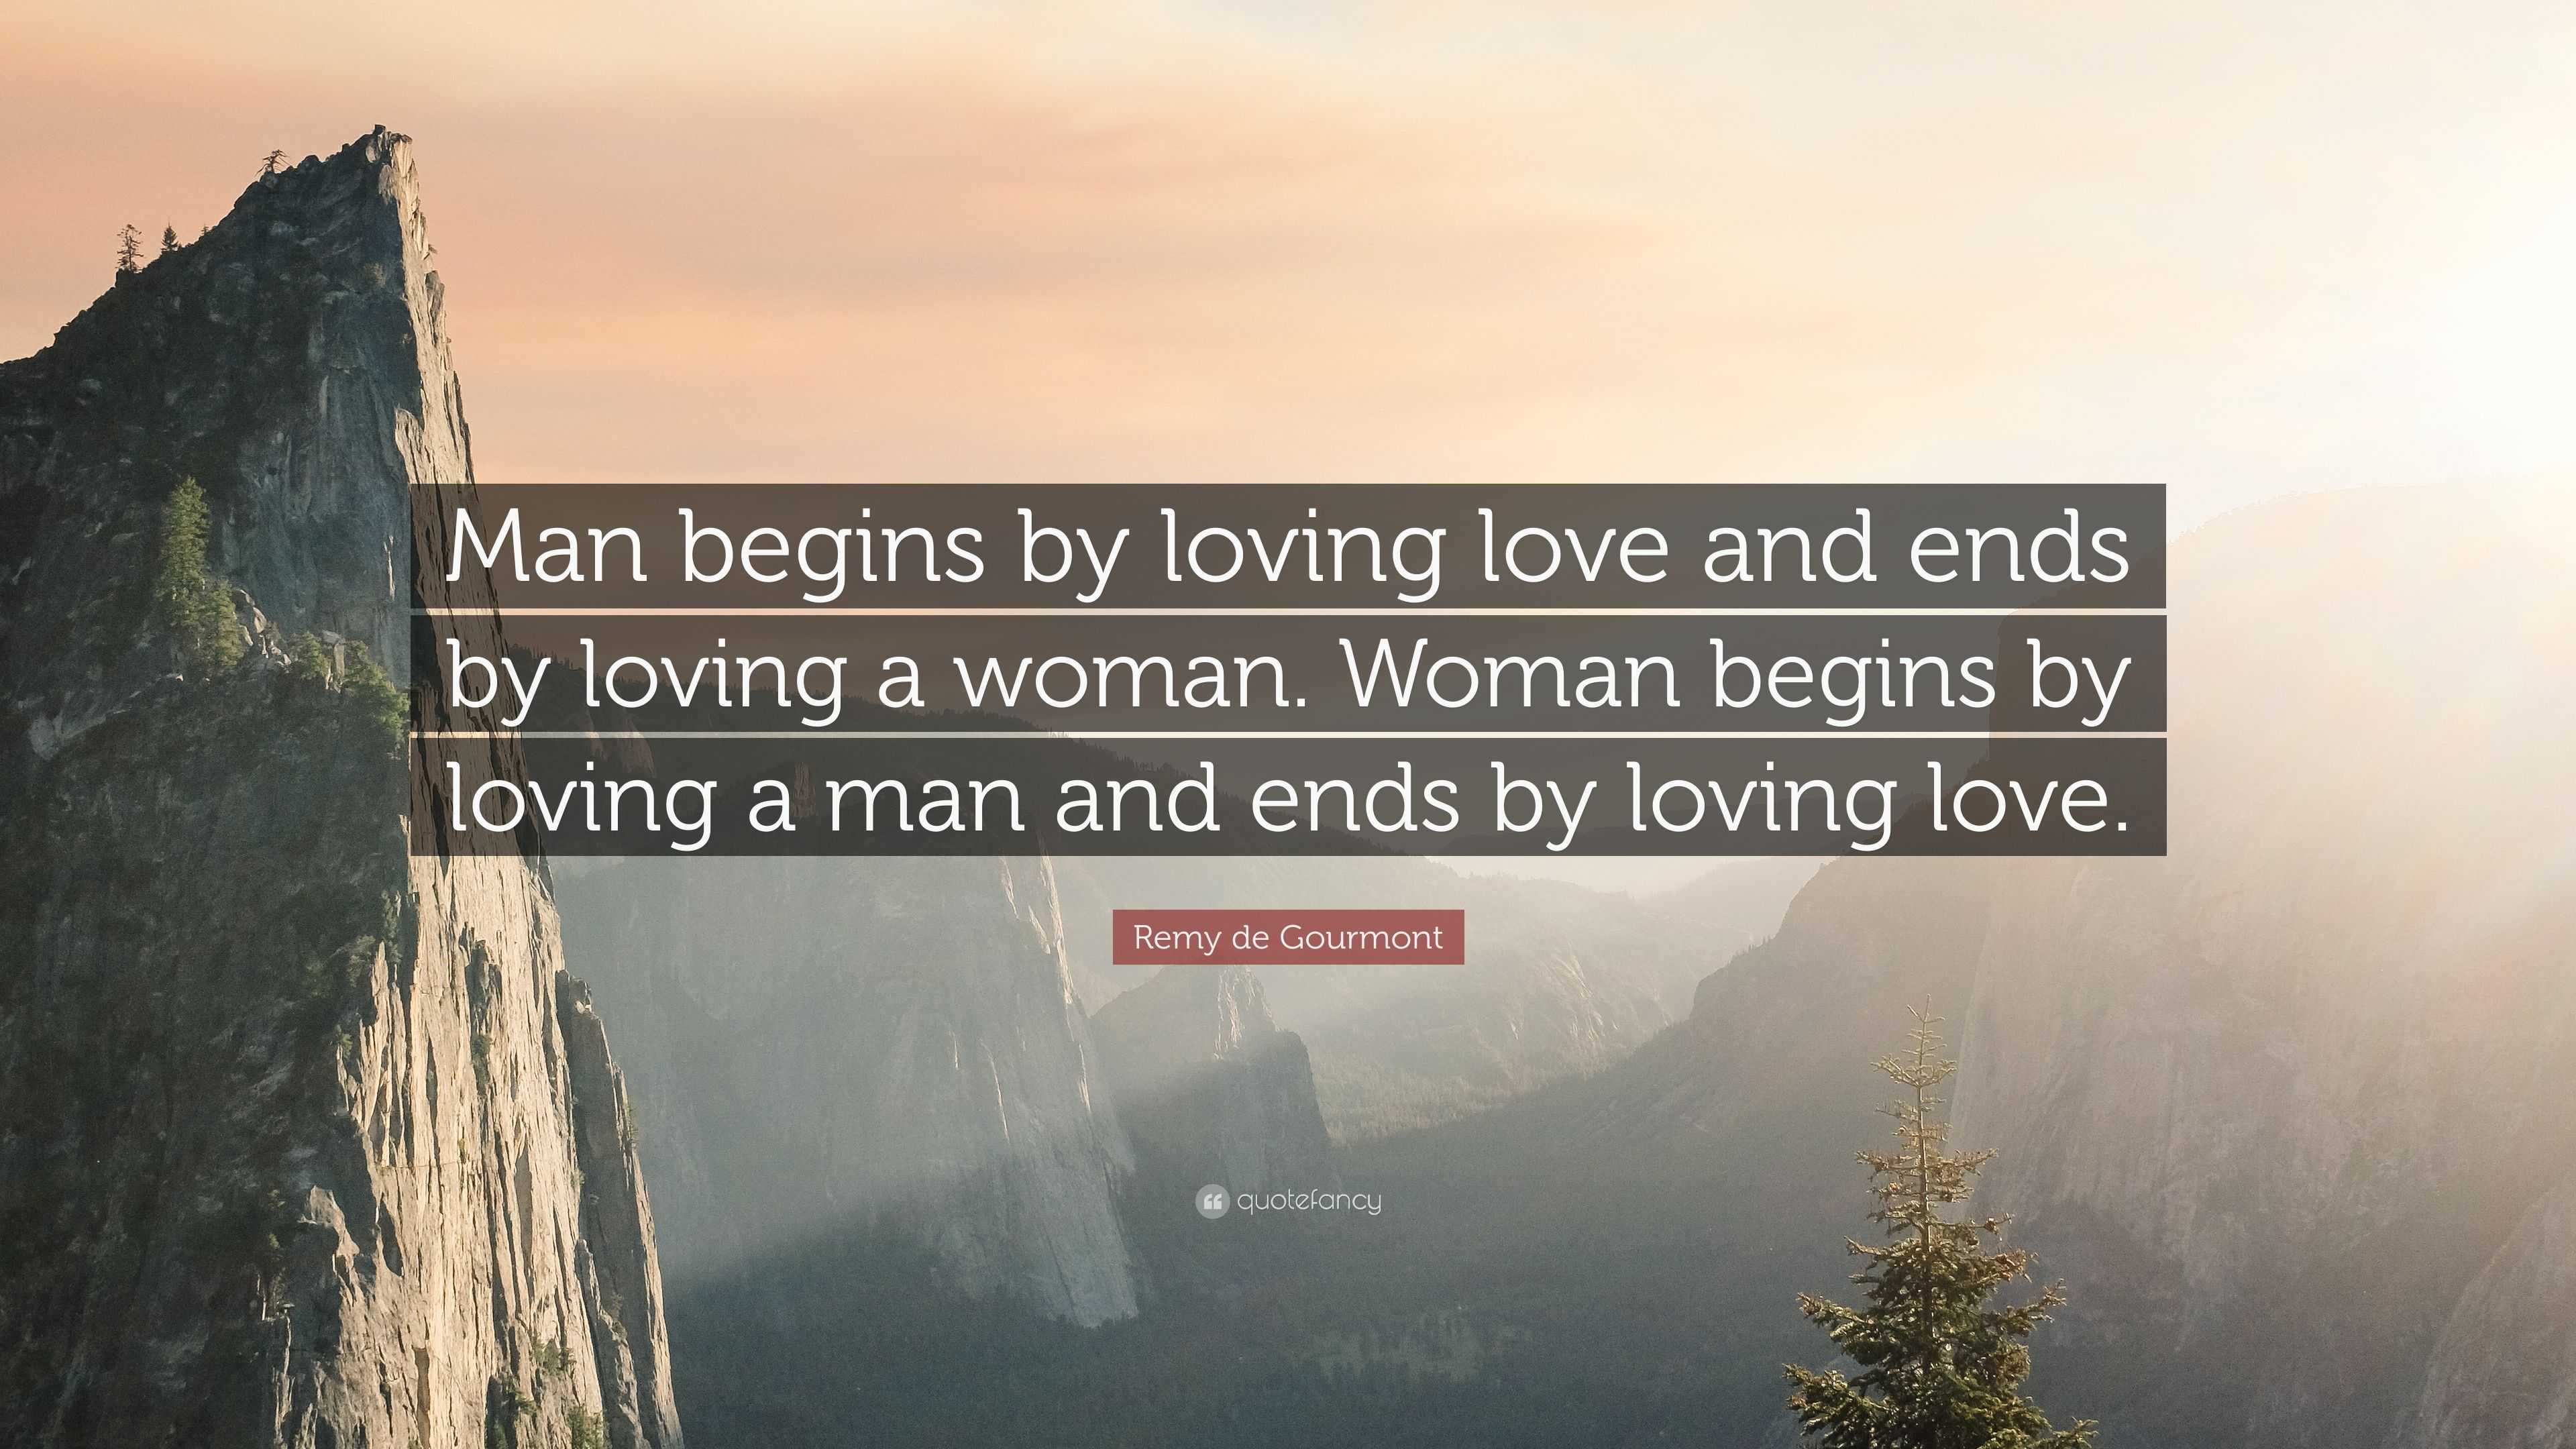 Remy de Gourmont Quote “Man begins by loving love and ends by loving a